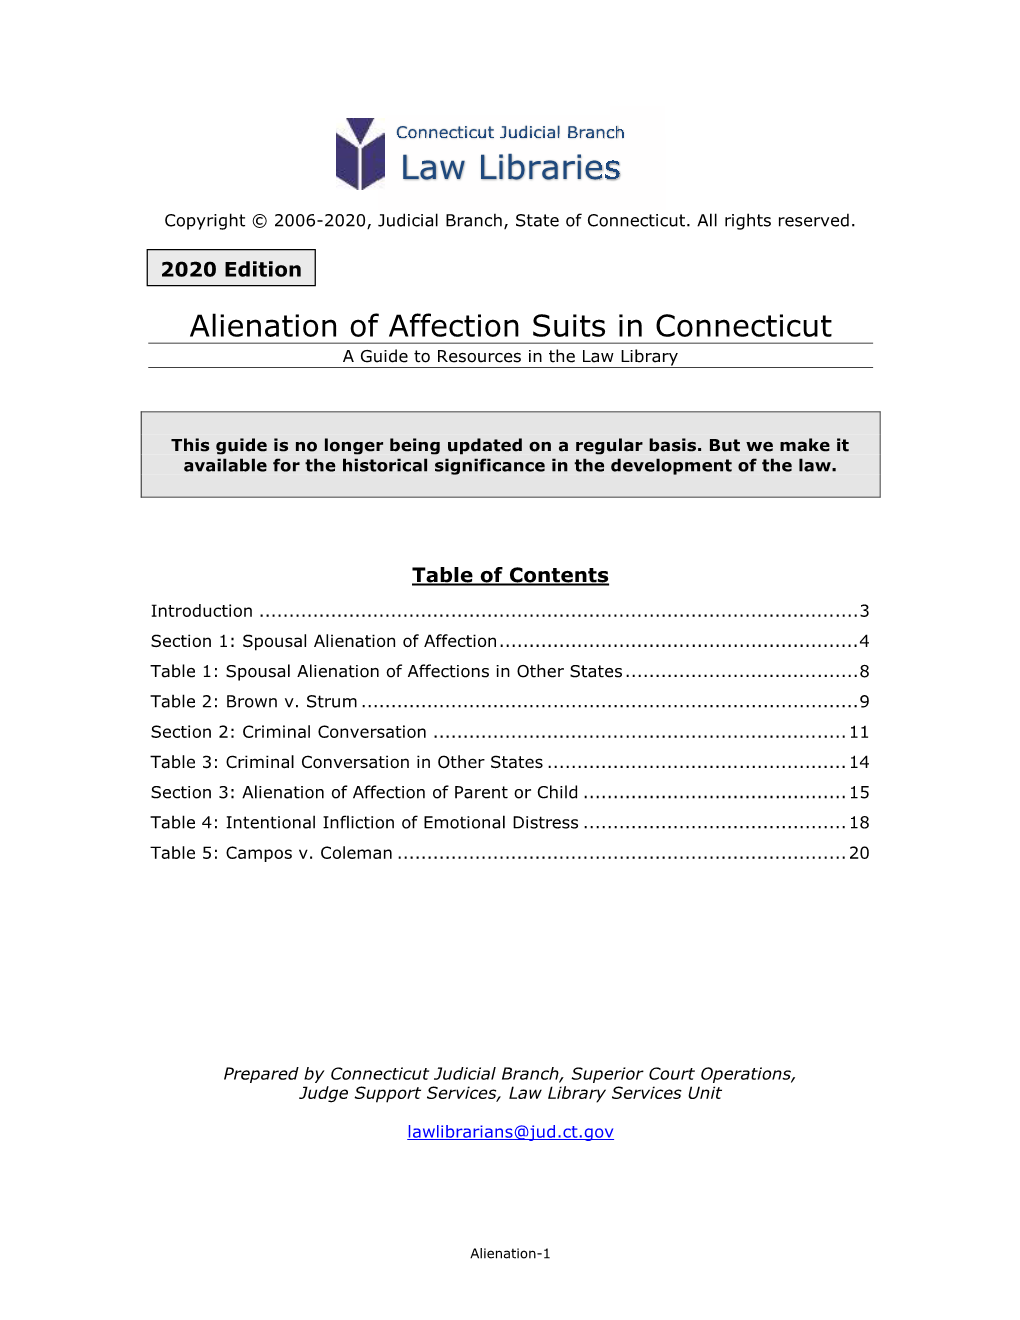 Alienation of Affection Suits in Connecticut a Guide to Resources in the Law Library